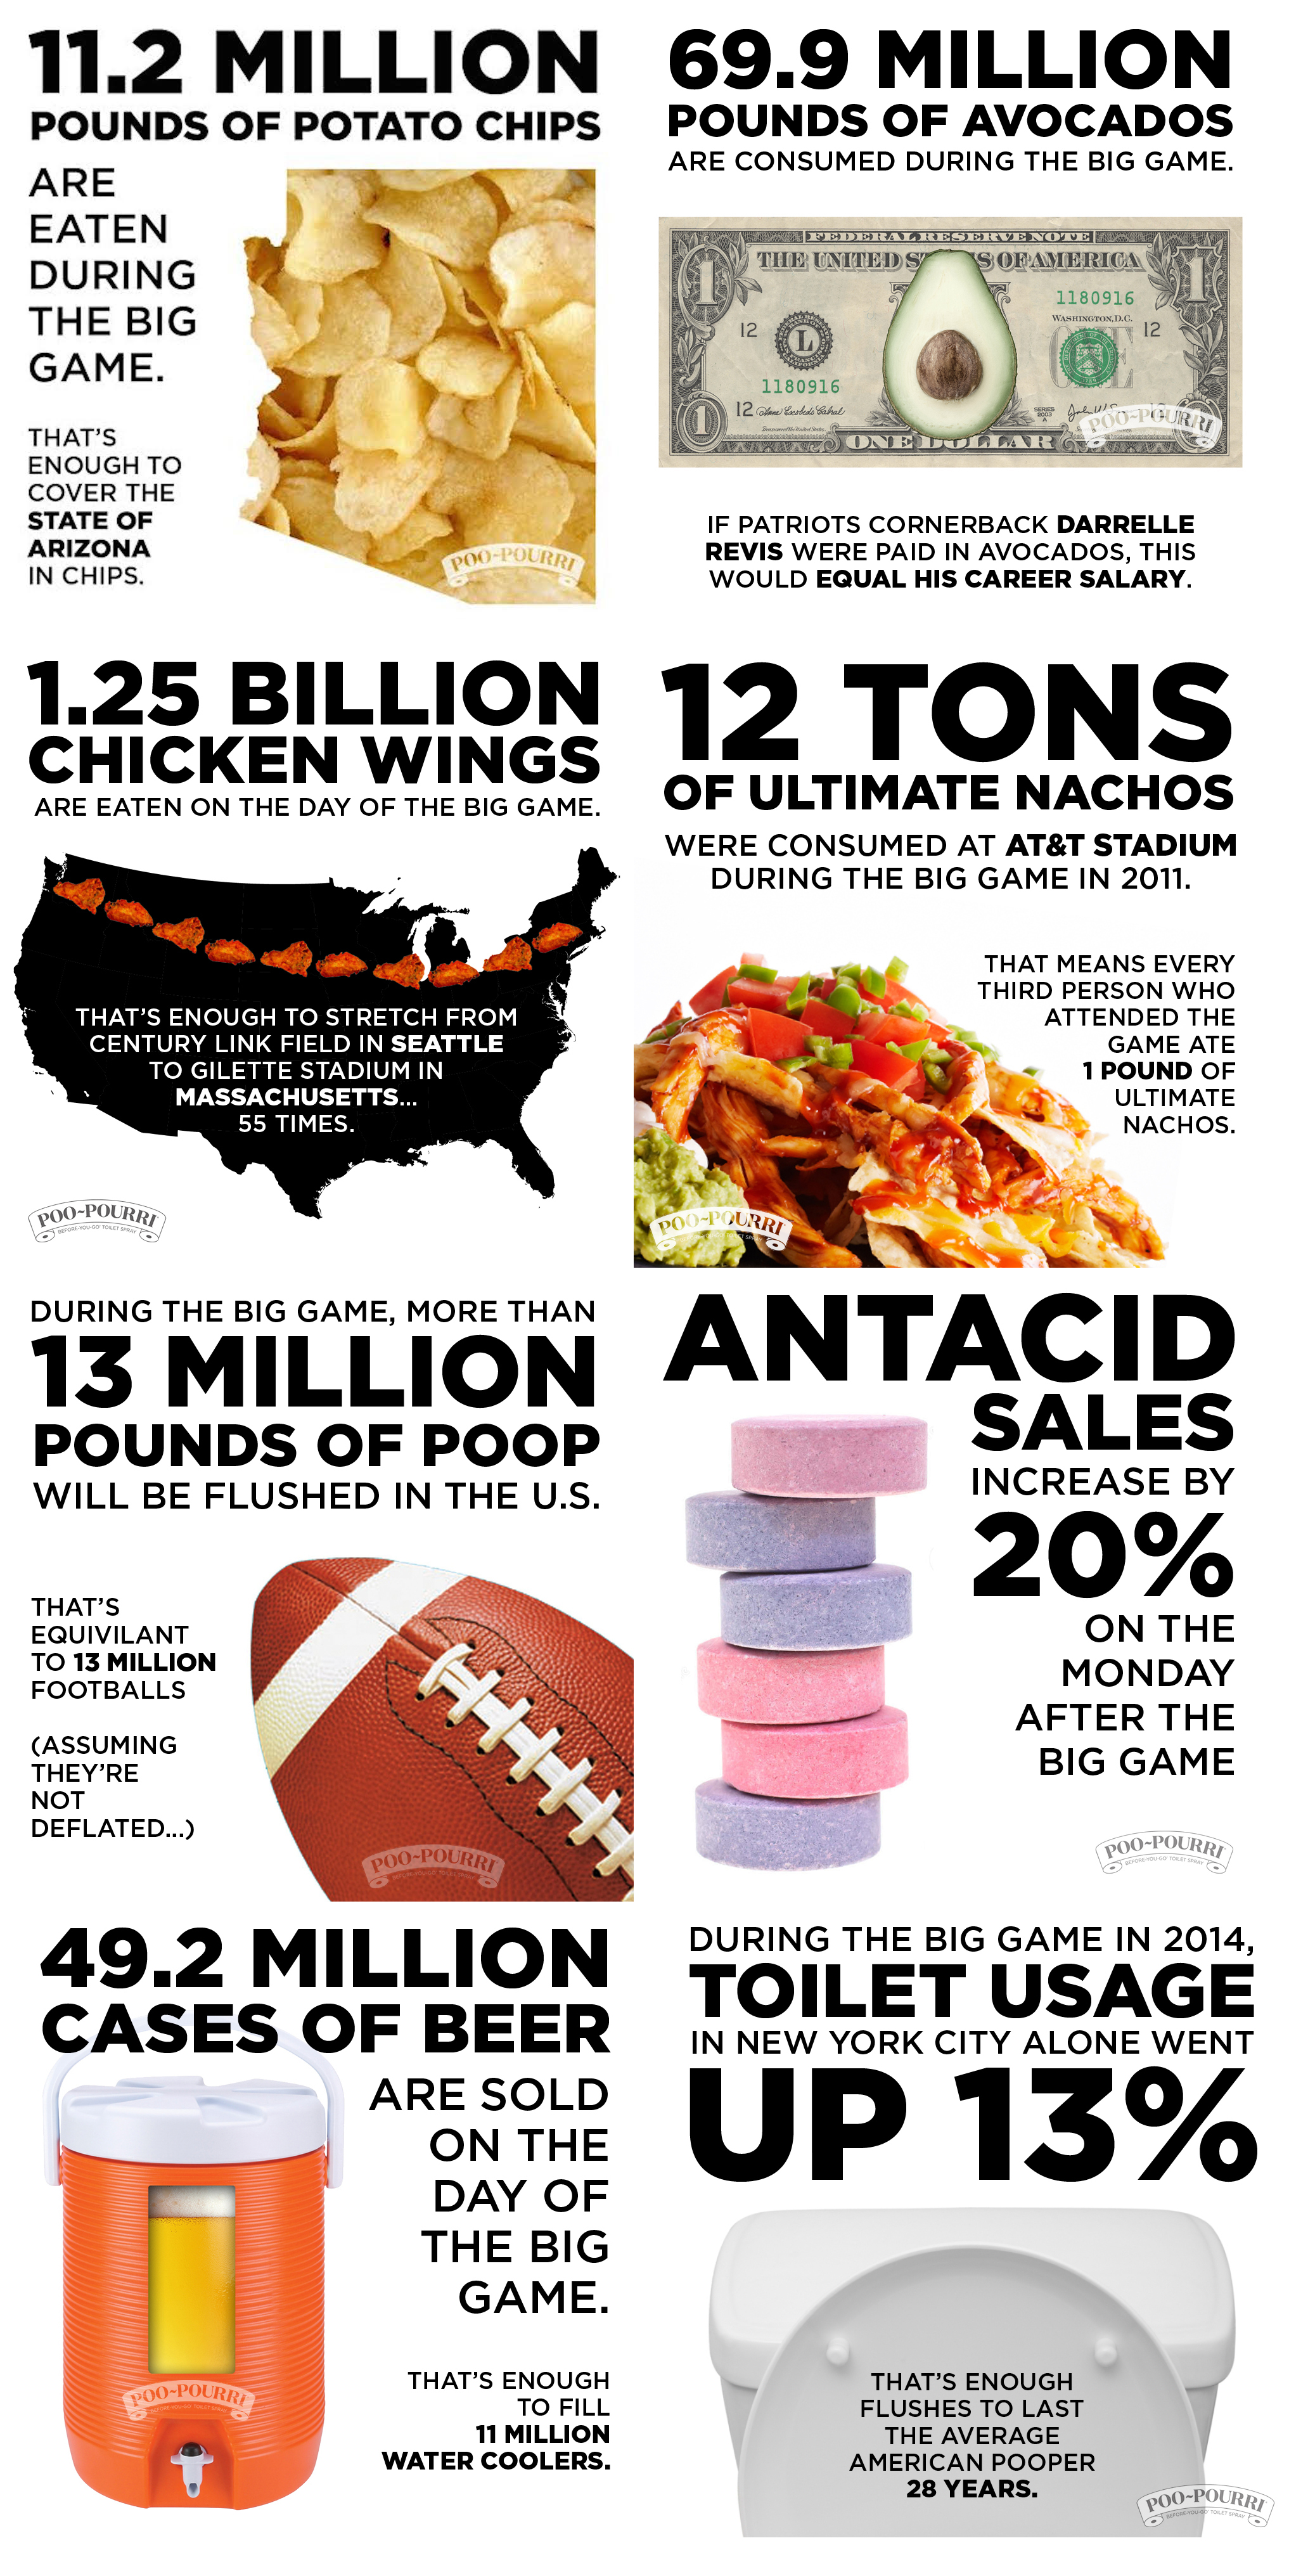 Infographic and stats provided by toilet spray company Poo-Pourri